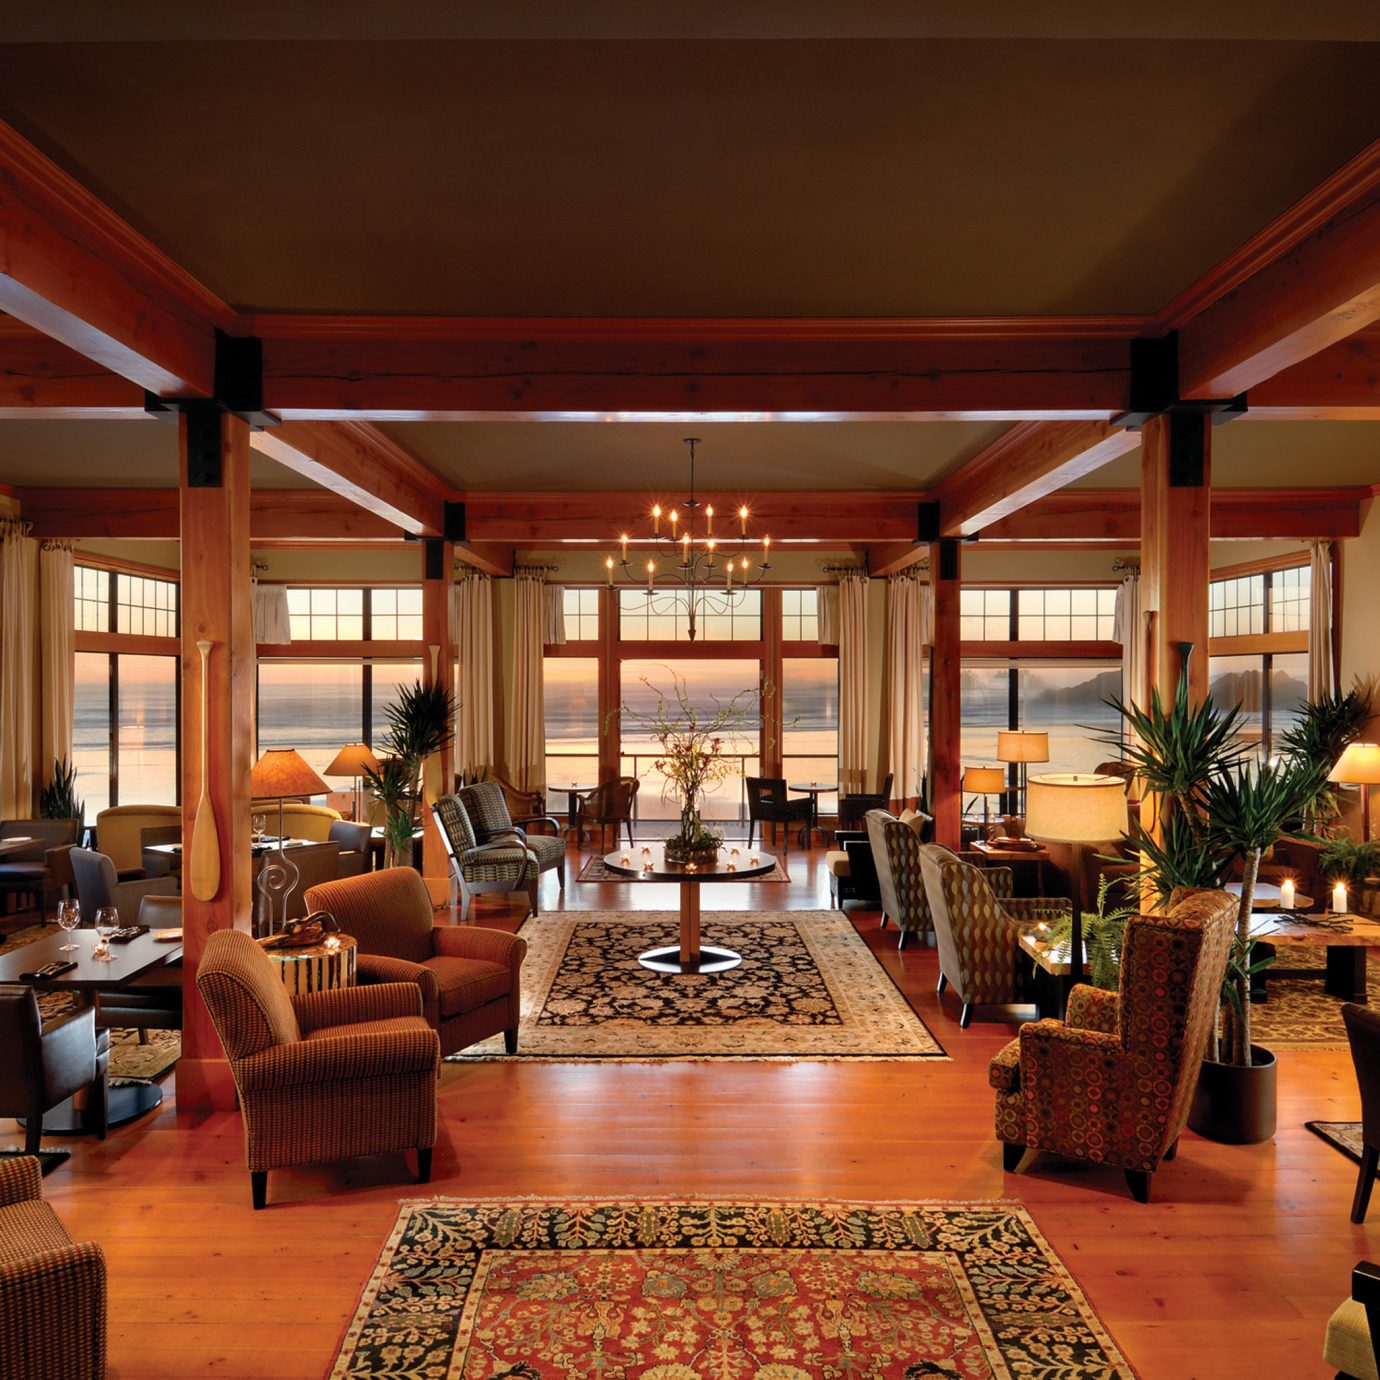 Dining Drink Eat Fireplace Lounge Resort Scenic views property Lobby restaurant home living room